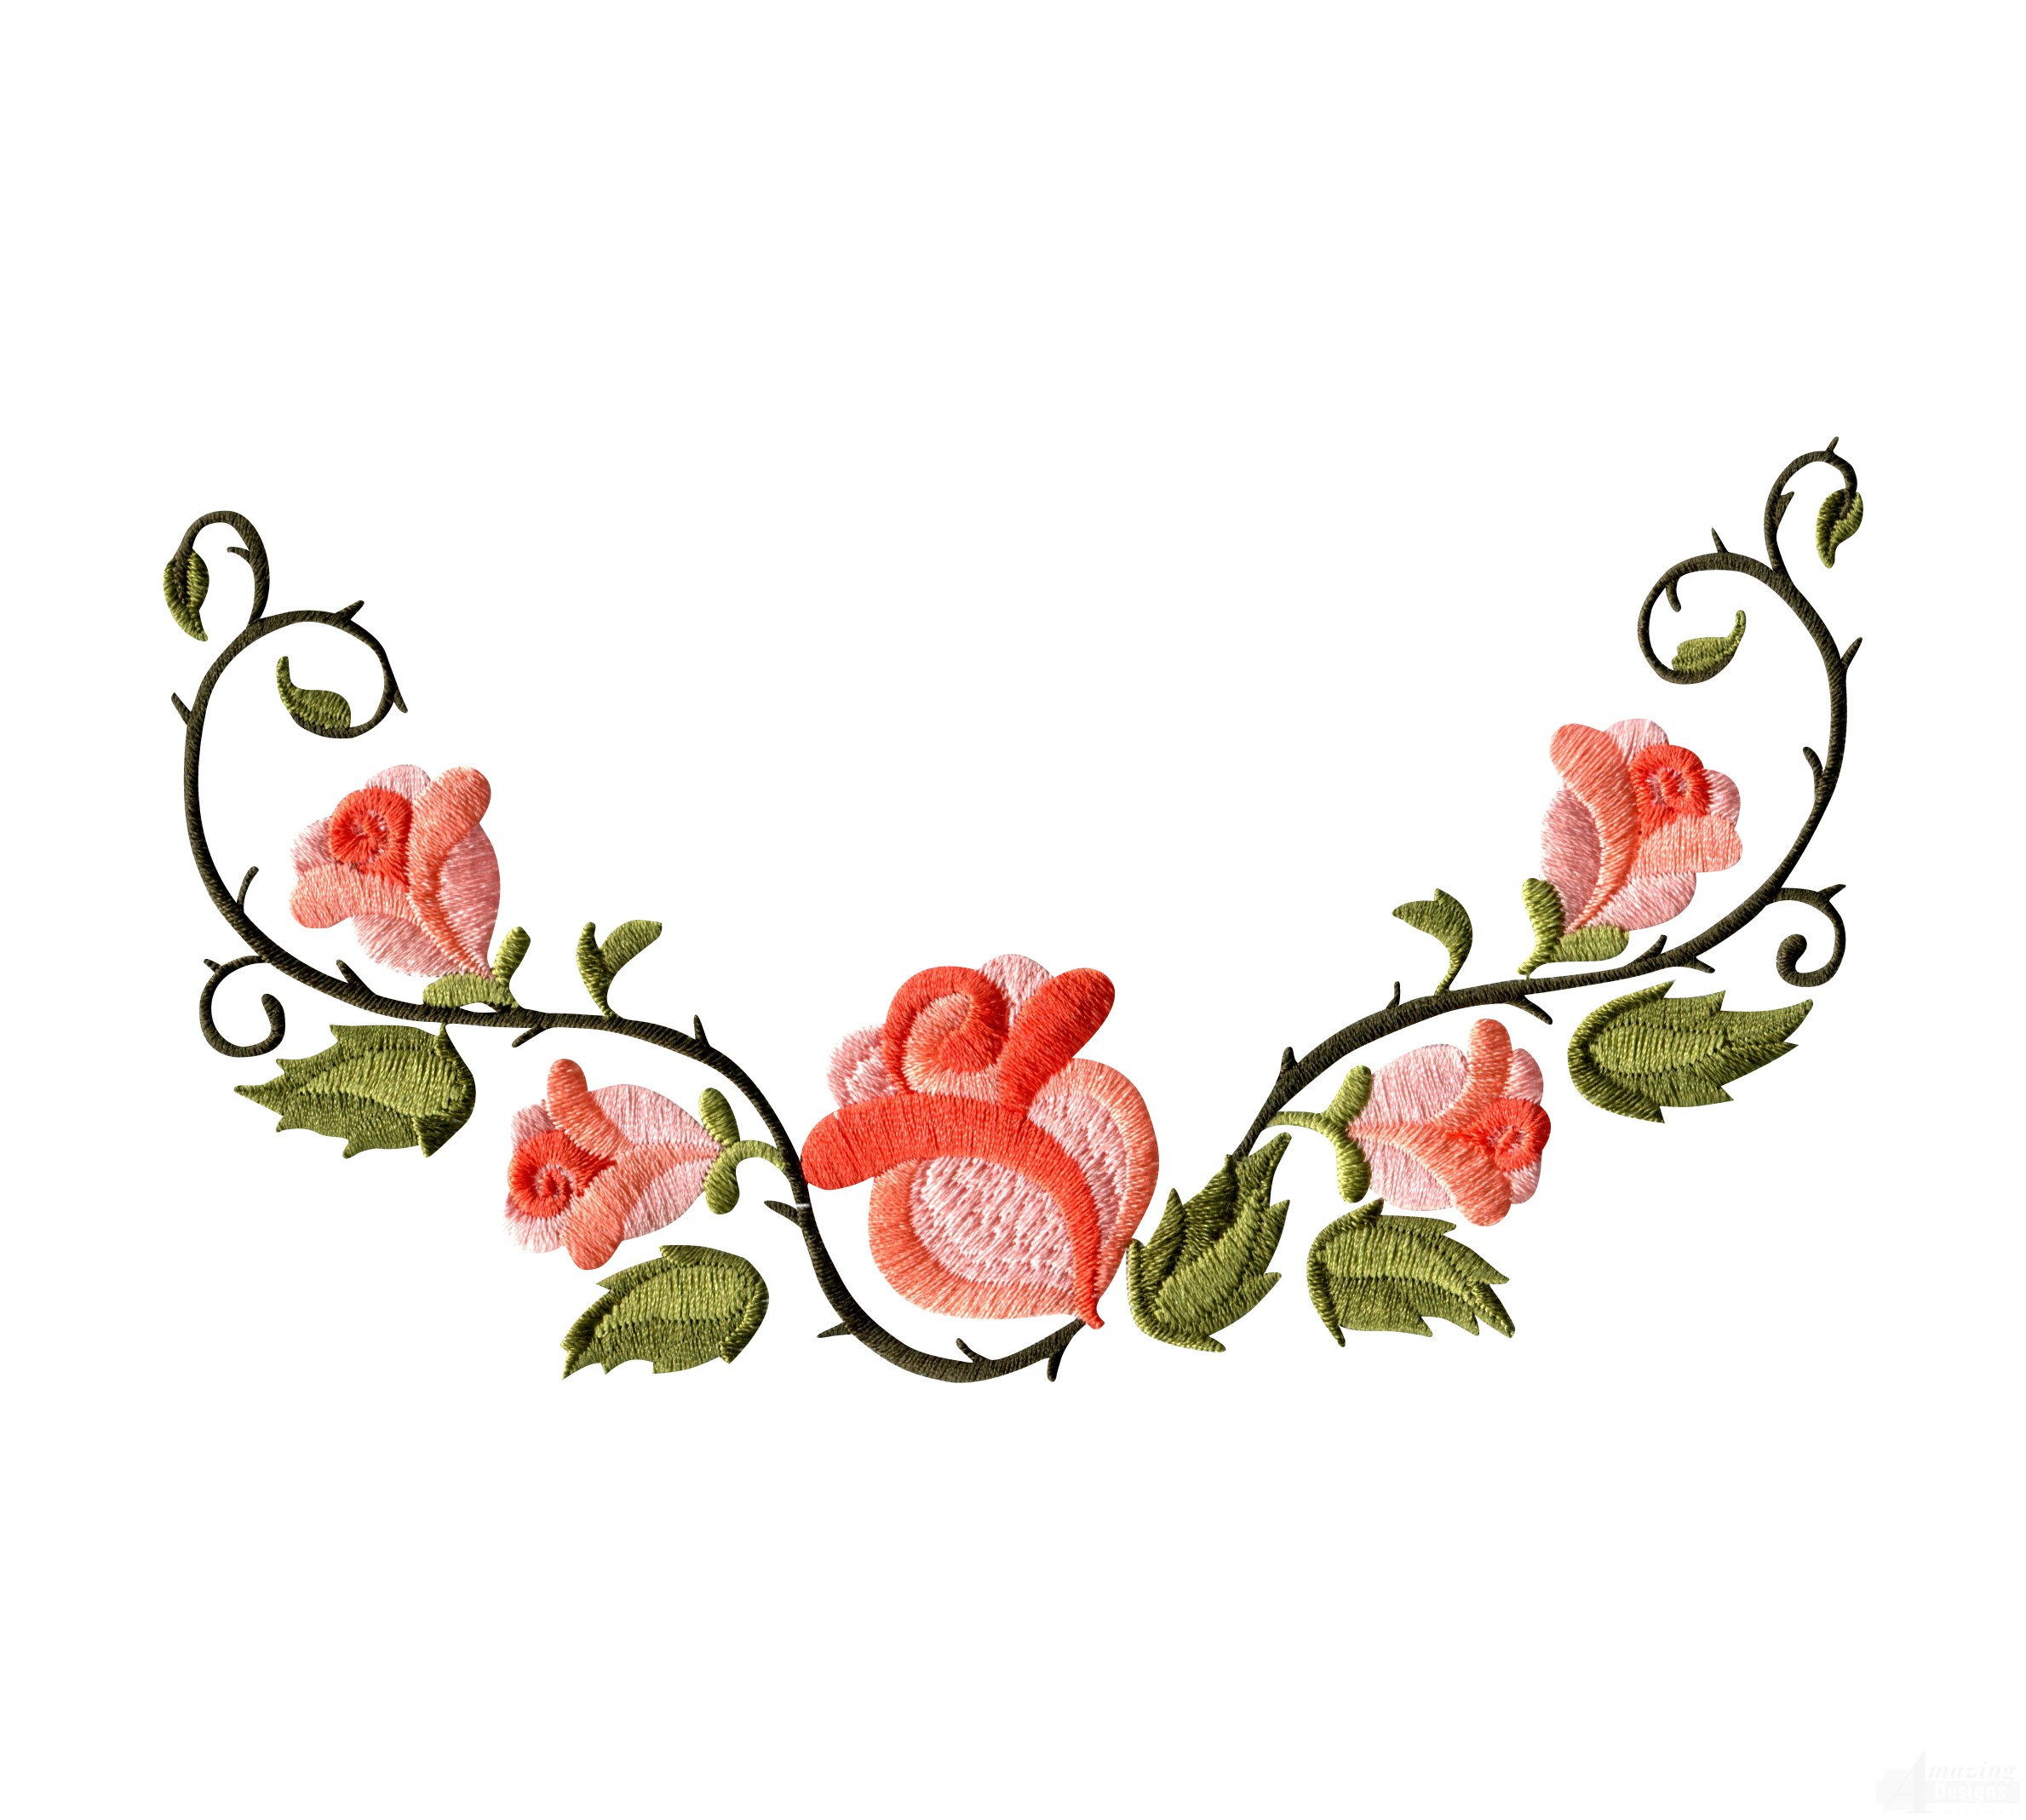 Clipart of Floral Border Embroidery Designs free image.